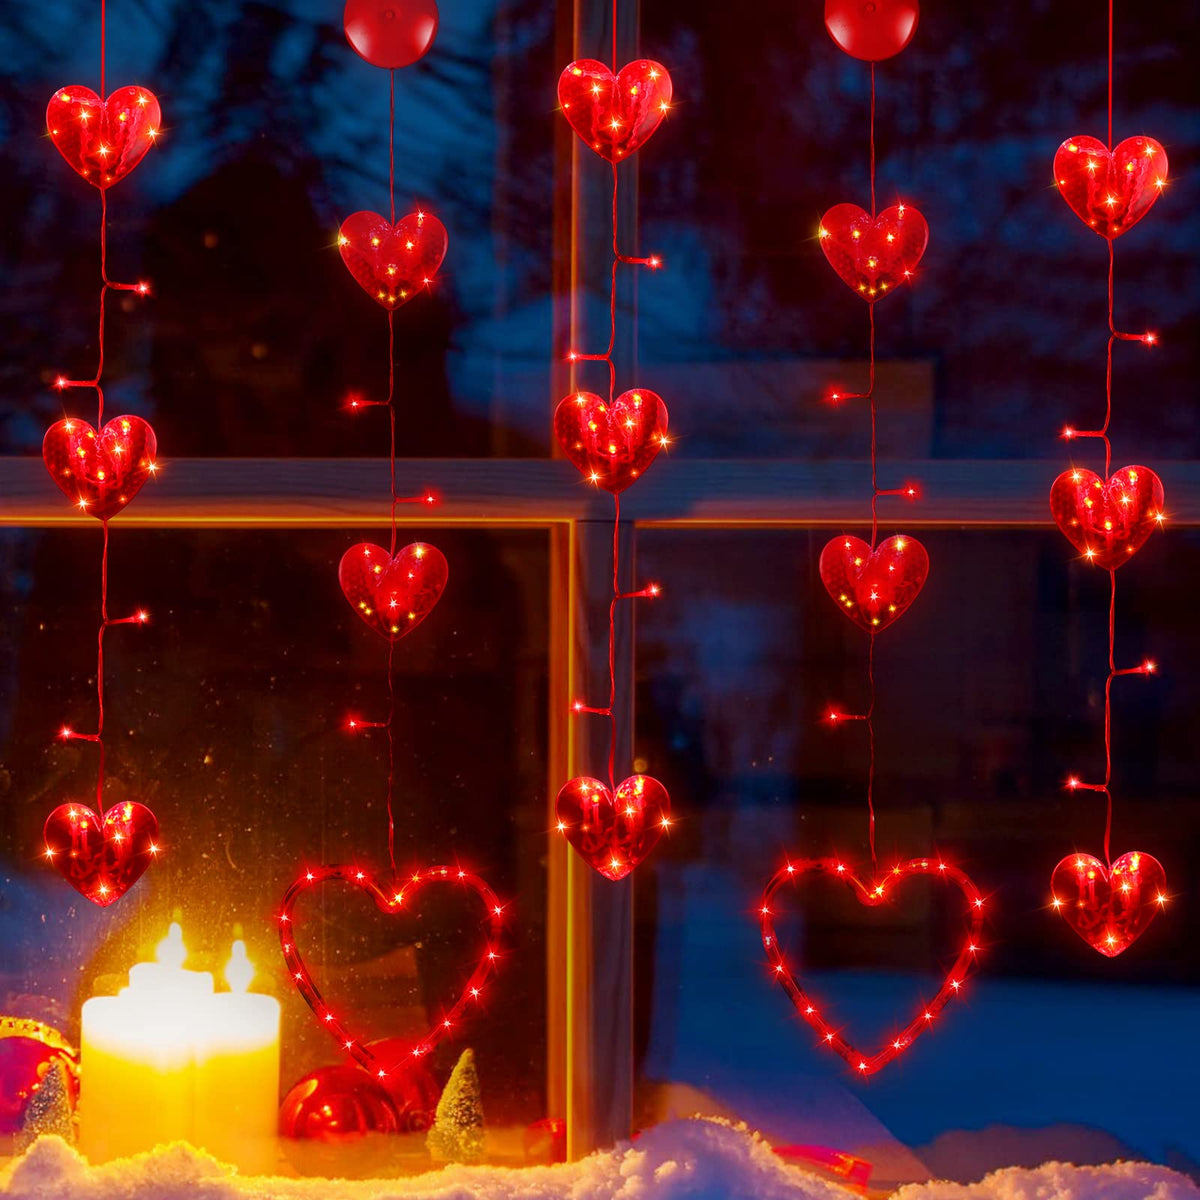 Lighted Valentines Day Window Decoration, 3 Pack Love Heart Window Lights,  Battery Operated Valentine Decorations for Wedding Mother's Day or Party